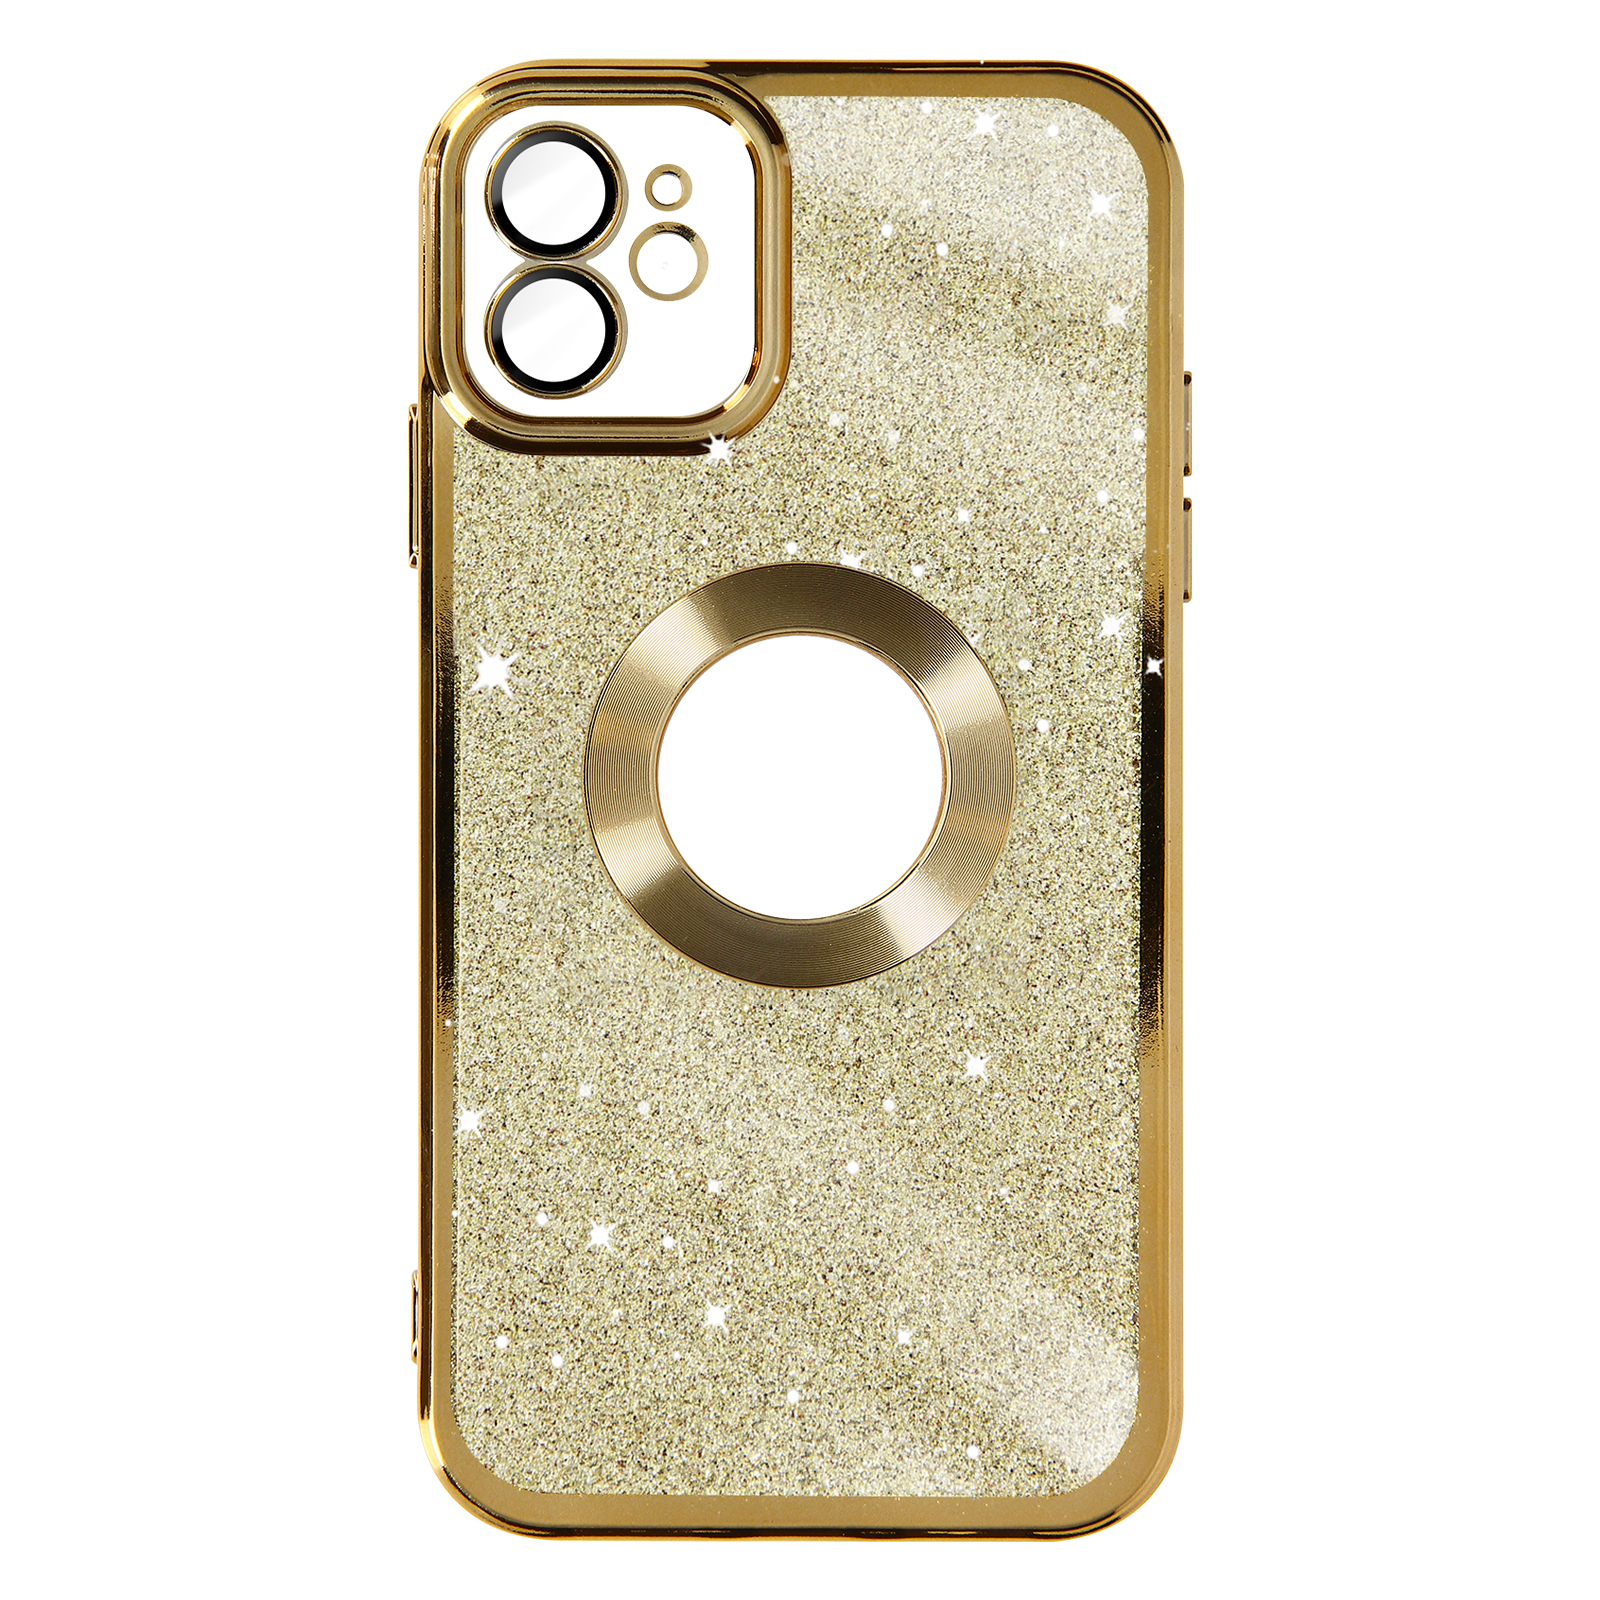 iPhone Apple, Gold Backcover, 12 Series, AVIZAR Spark Pro, Protecam